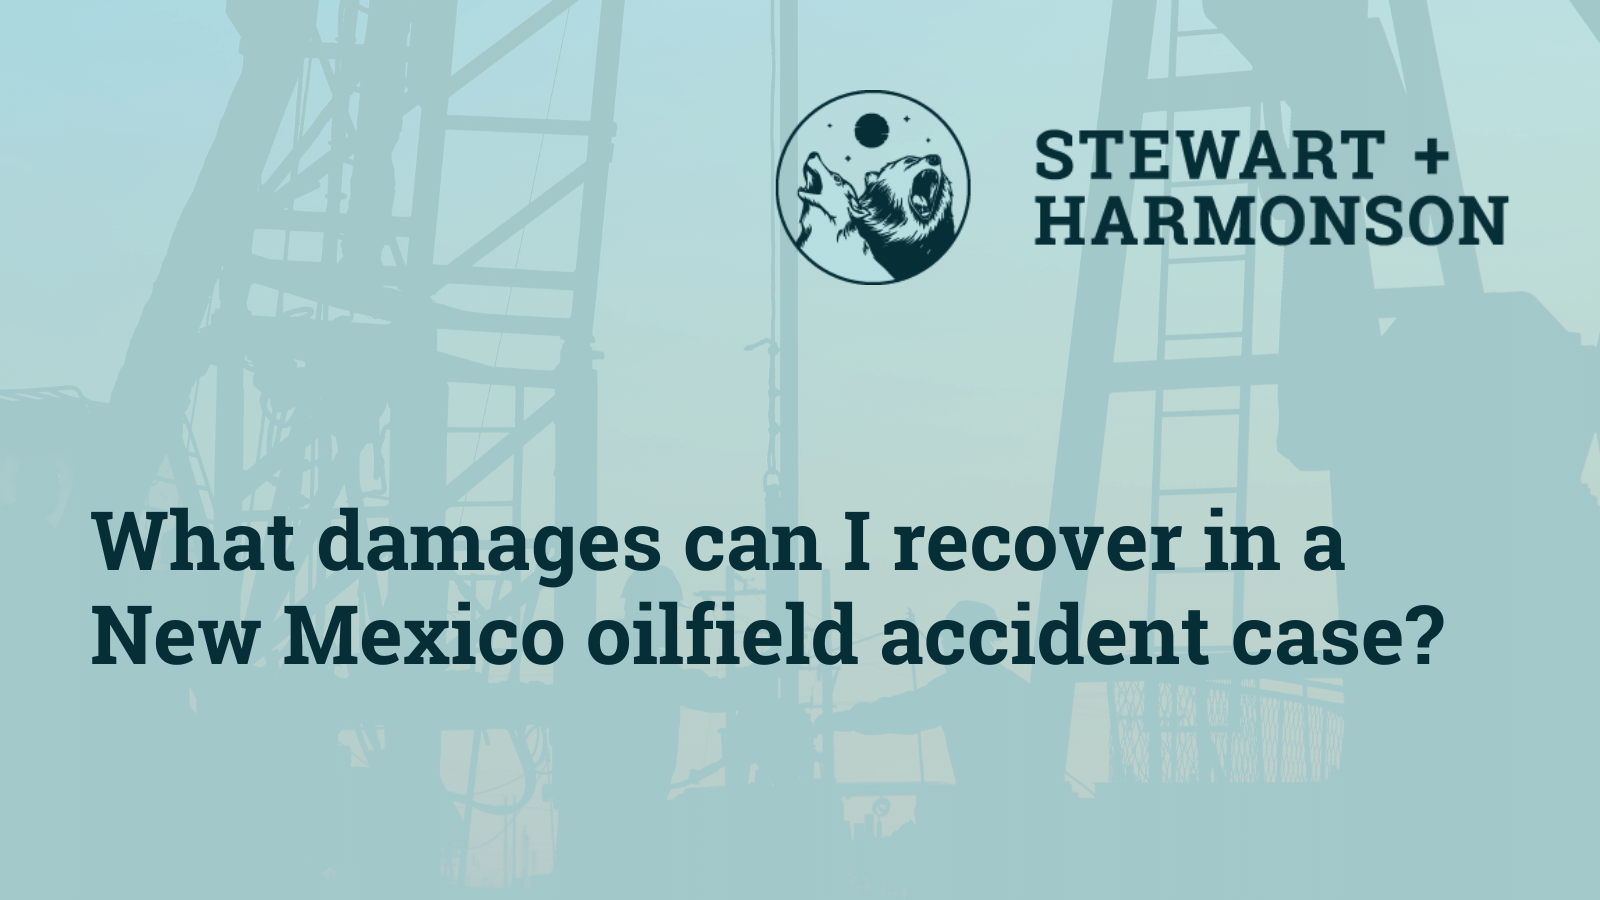 What damages can I recover in a New Mexico oilfield accident case - Stewart Harmonson Law Firm - New Mexico